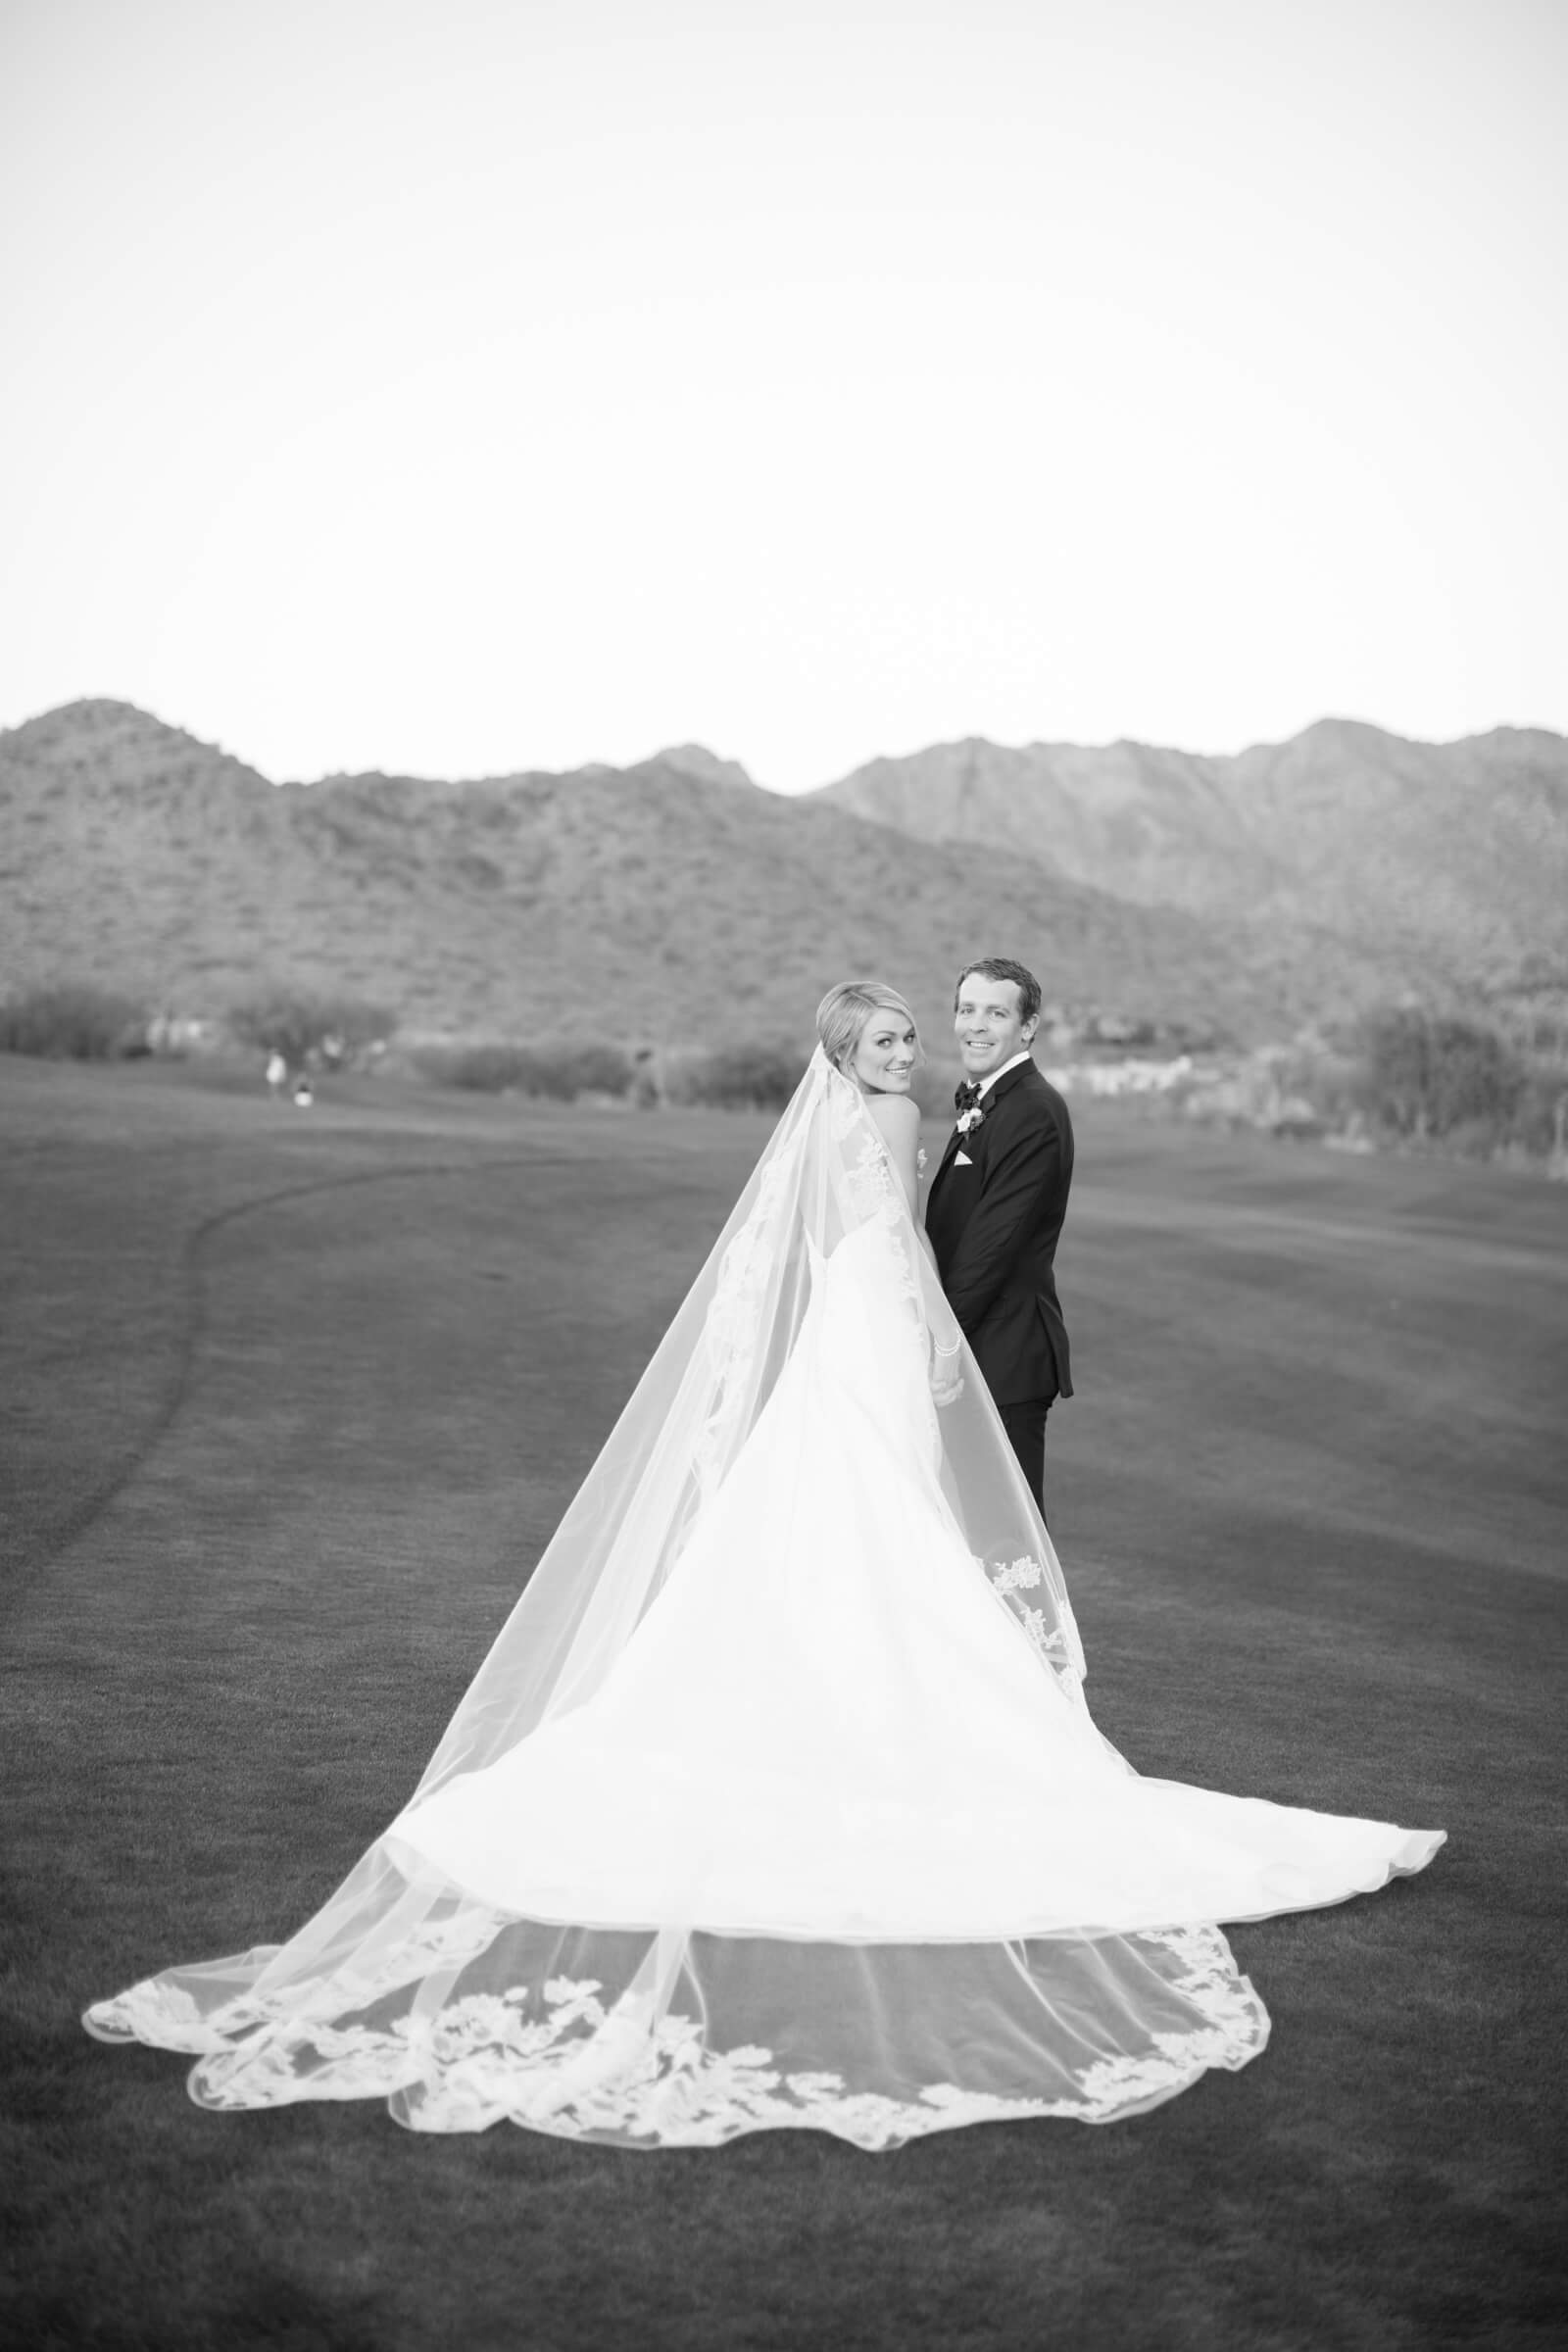 Saluti Scottsdale for Julie Price and Alex Barnes - John Cain Photography